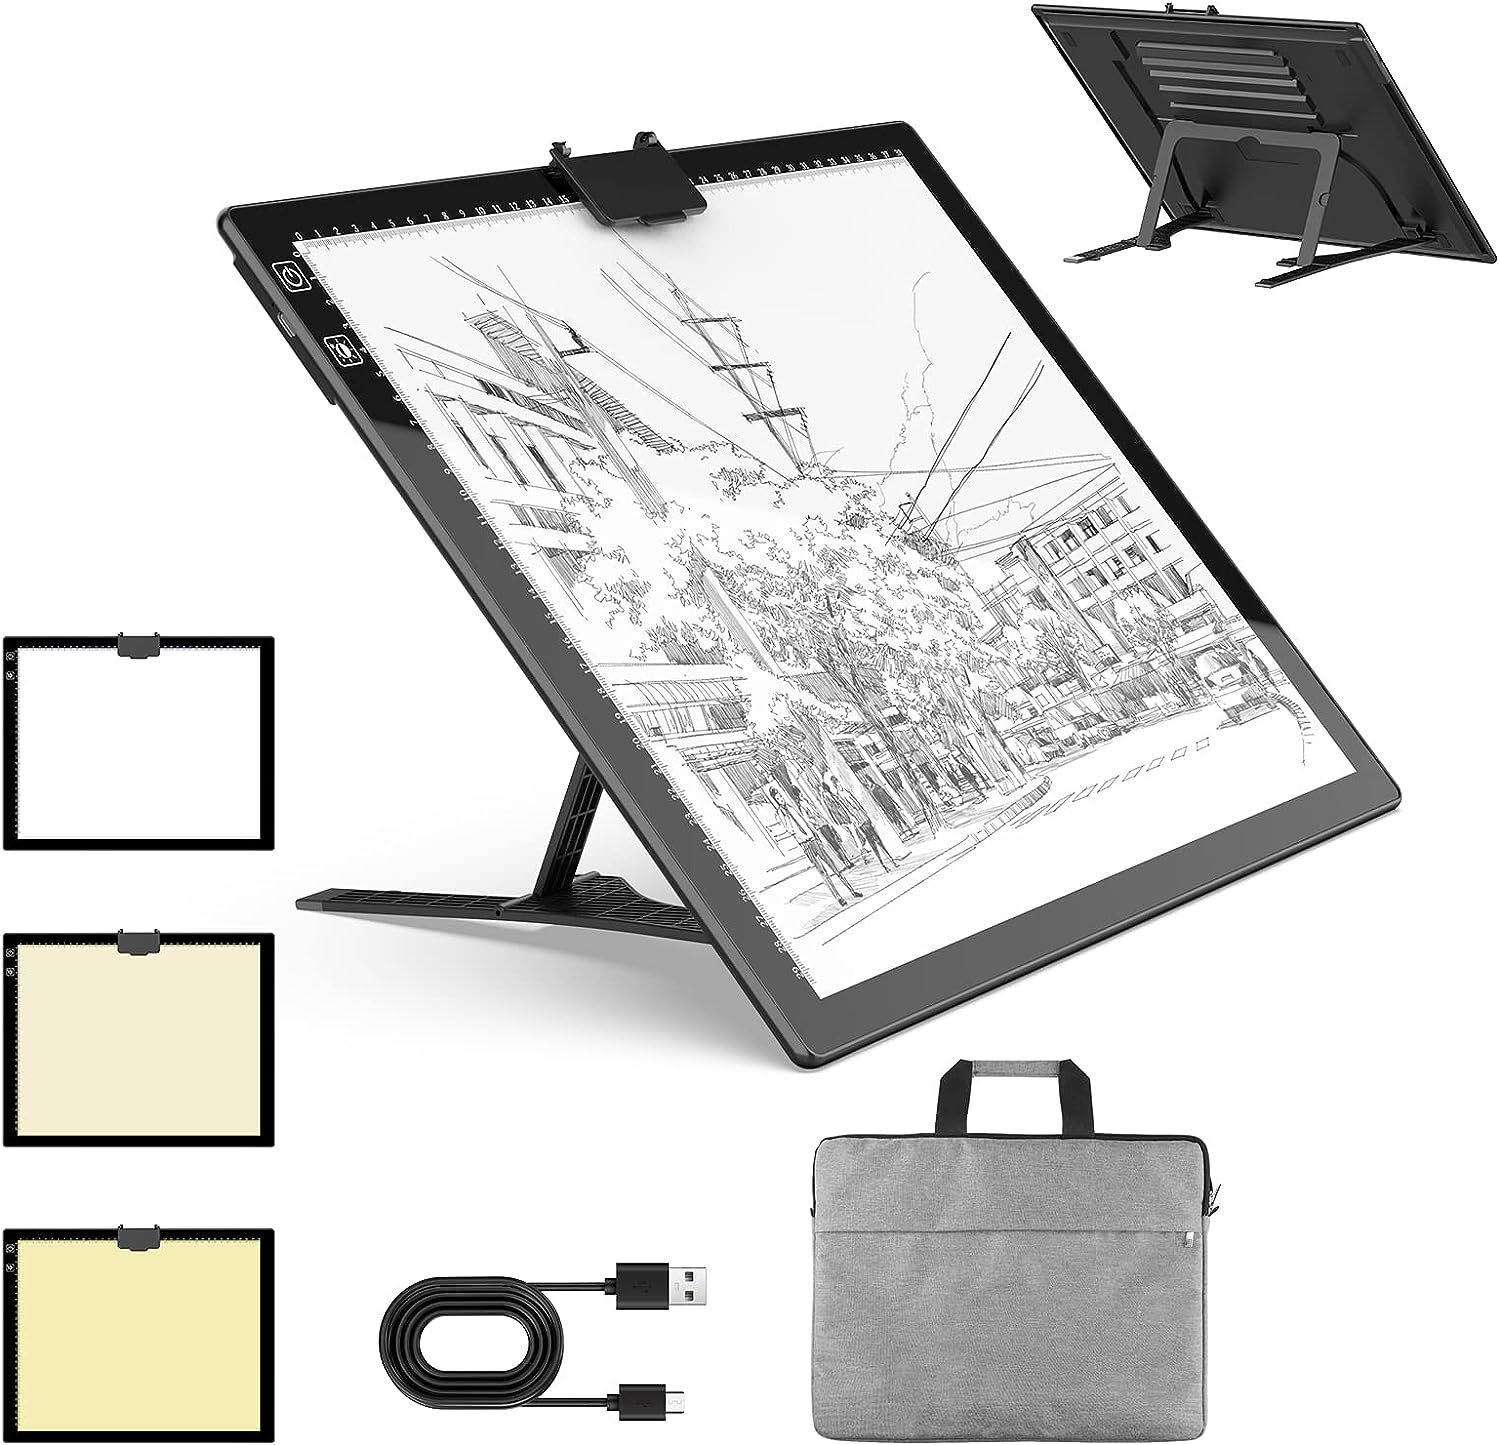 Wireless A3 Light Pad with Carrying Case, QENSPE Black Case 